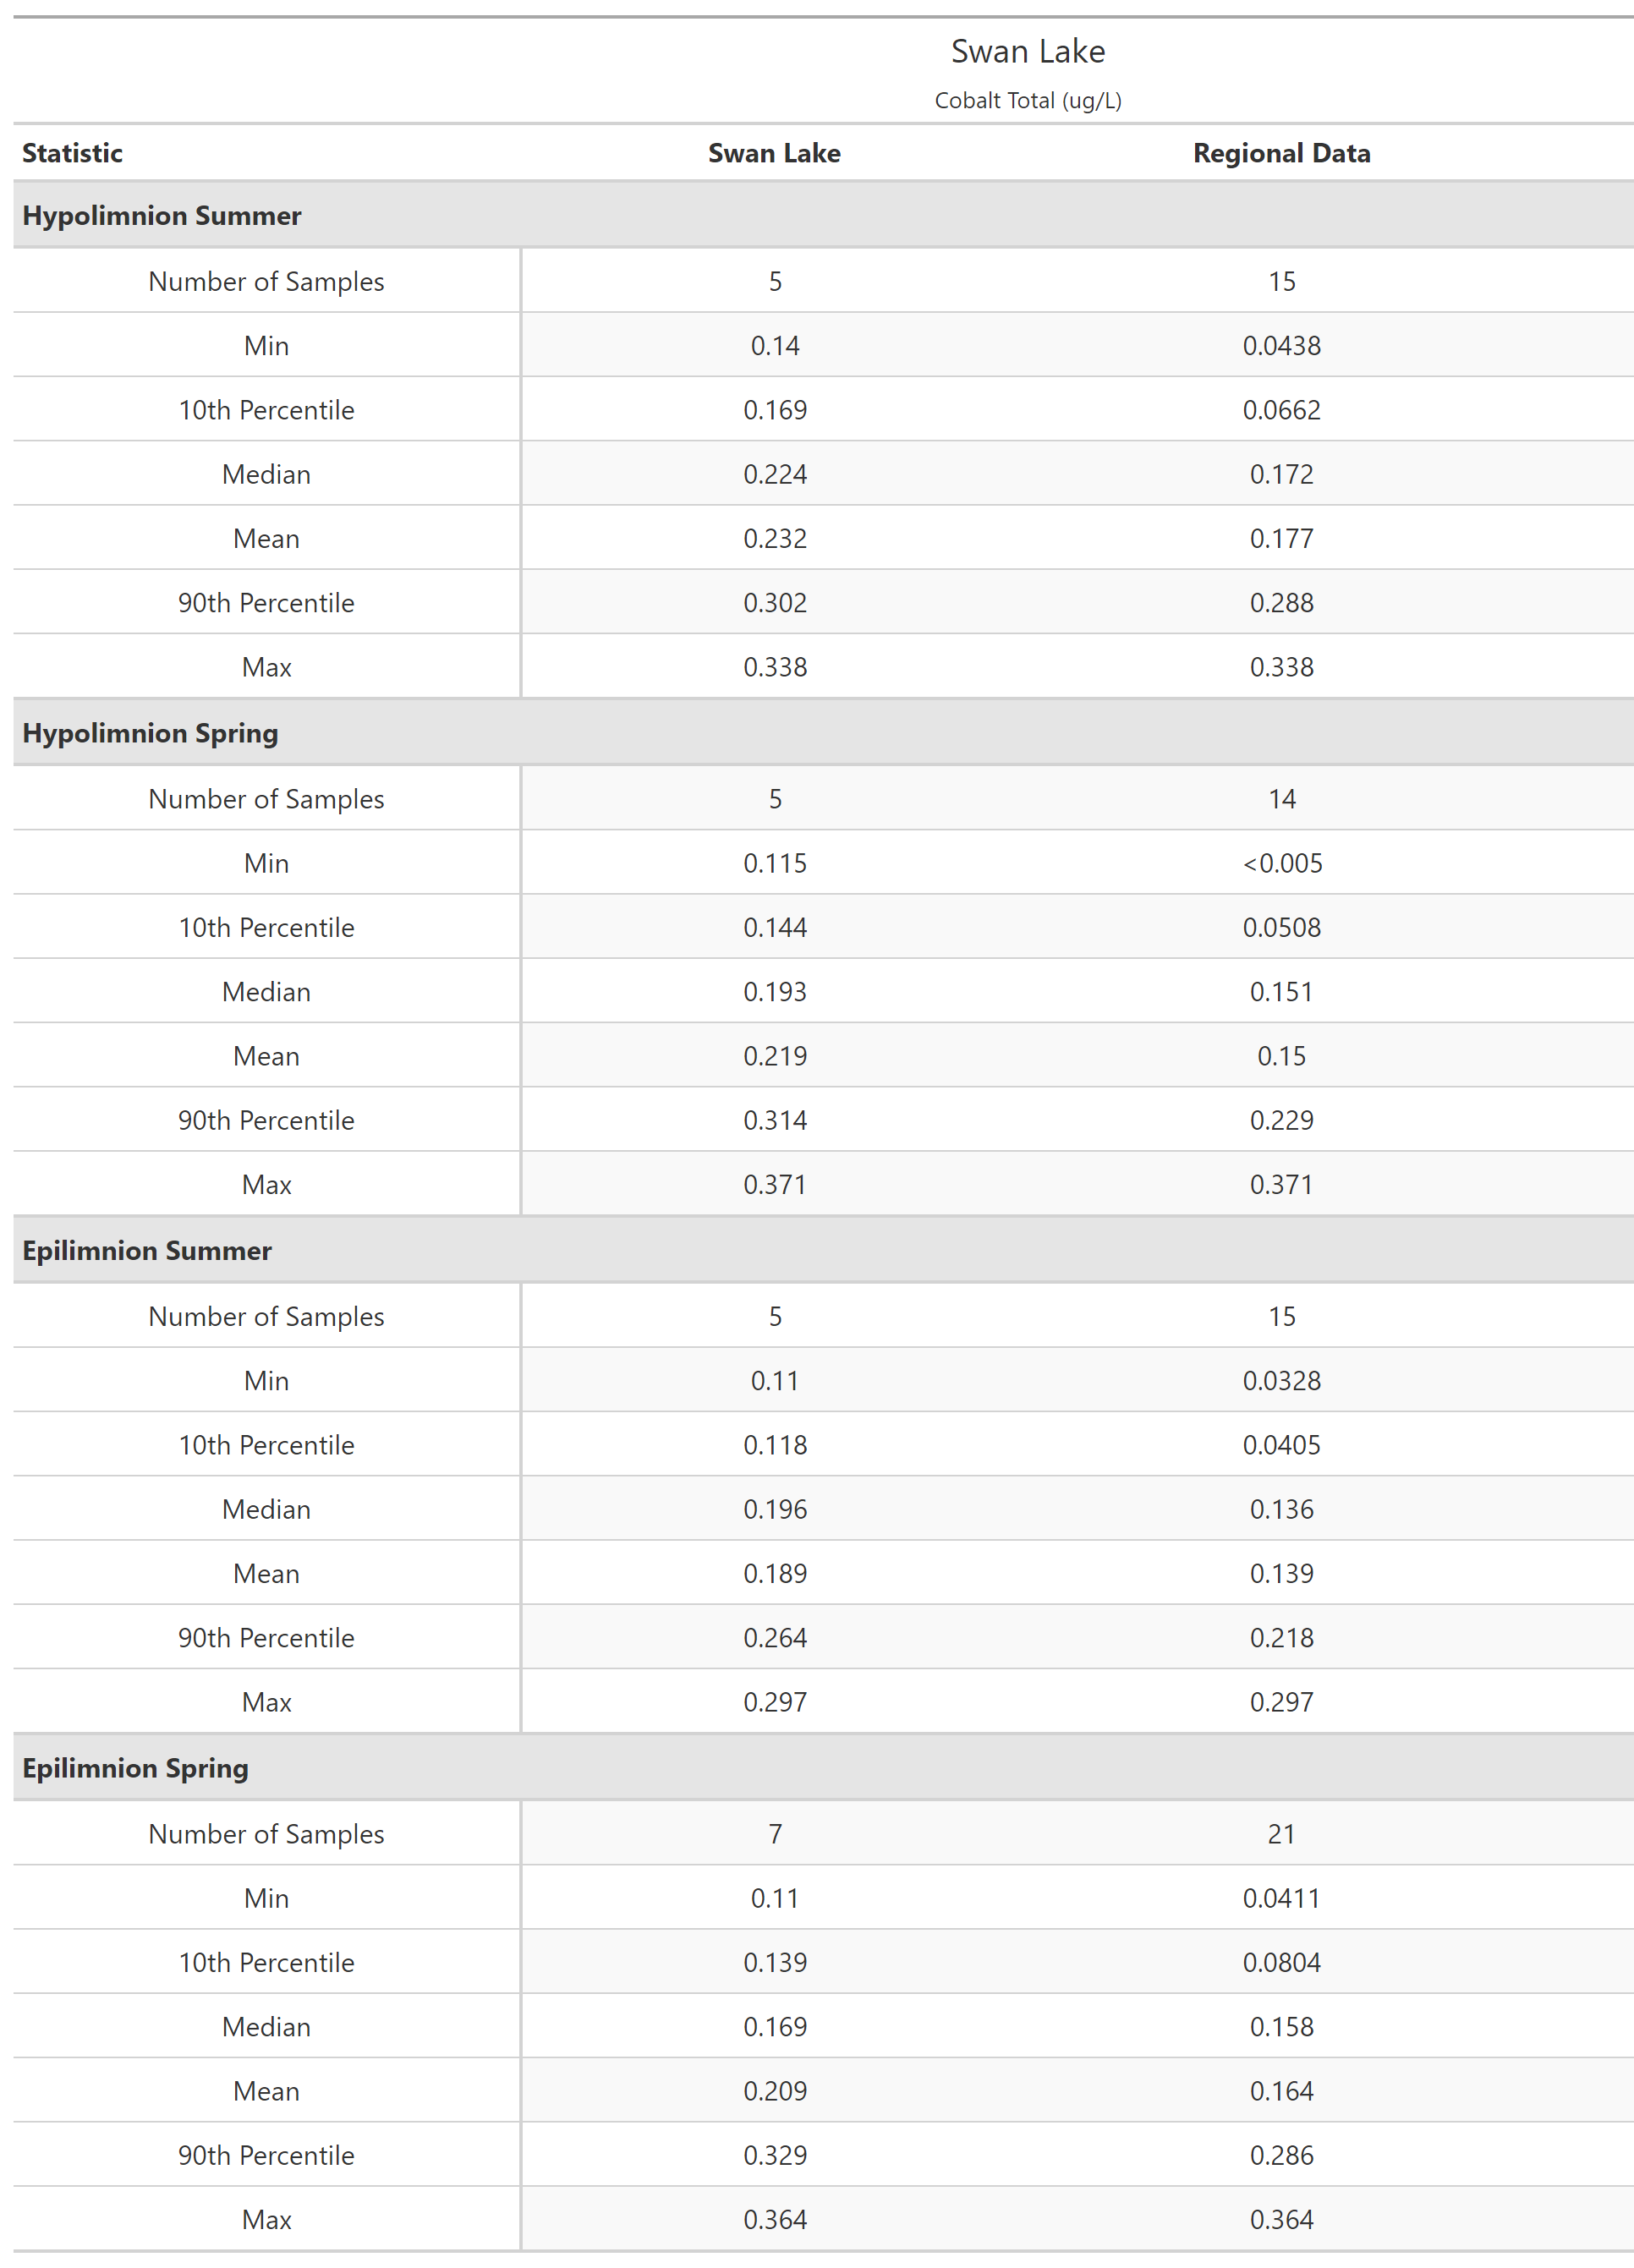 A table of summary statistics for Cobalt Total with comparison to regional data